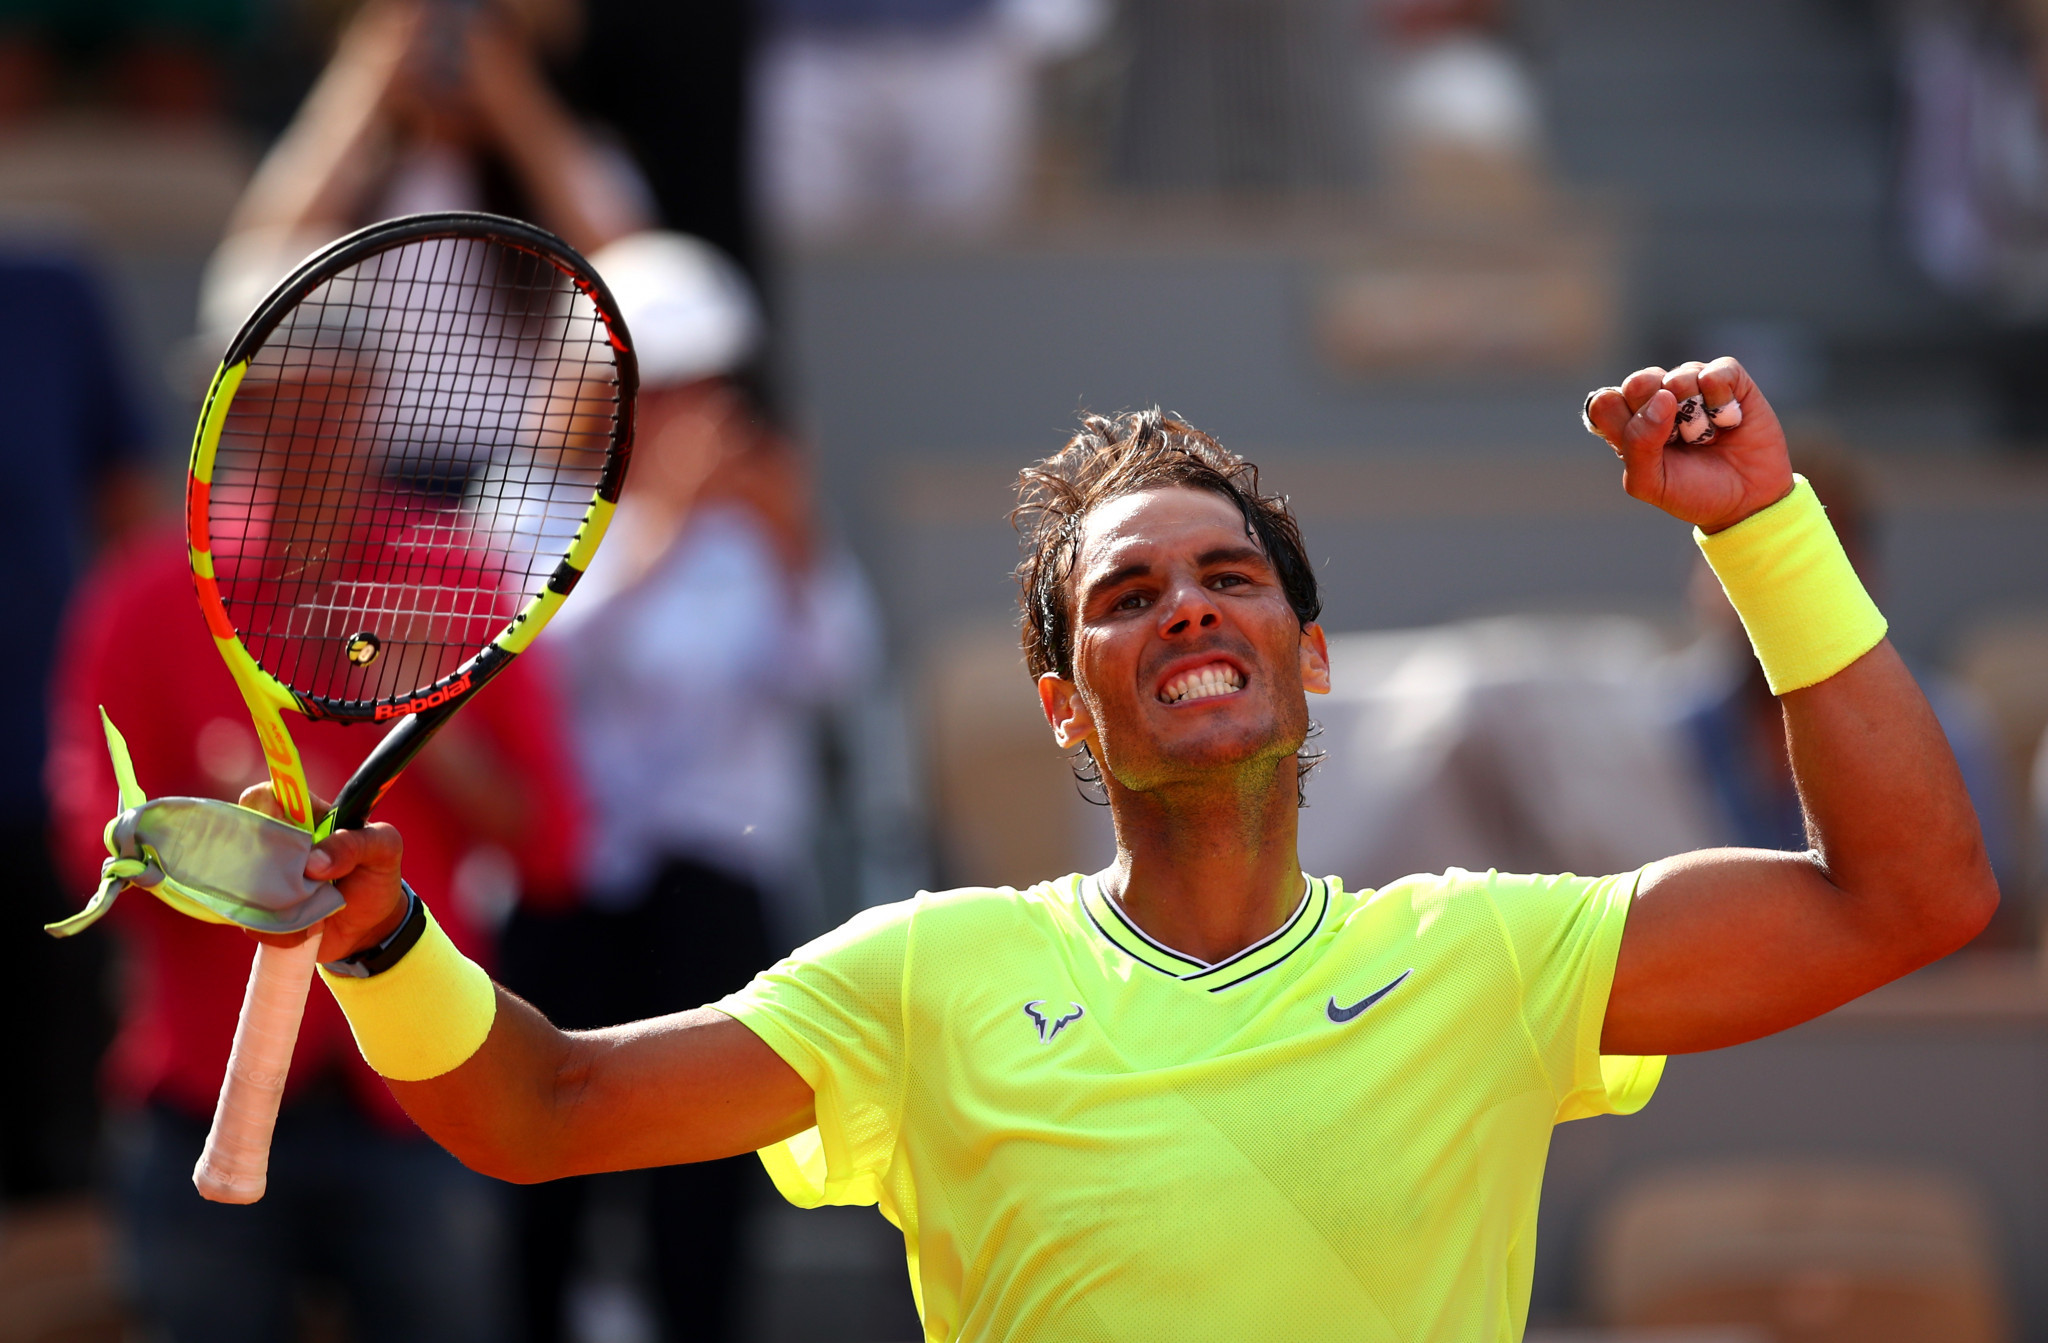 Spain's Rafael Nadal chalked up his 90th Roland Garros victory by defeating Argentina's Juan Ignacio Londero 6-2, 6-3, 6-3 ©Getty Images